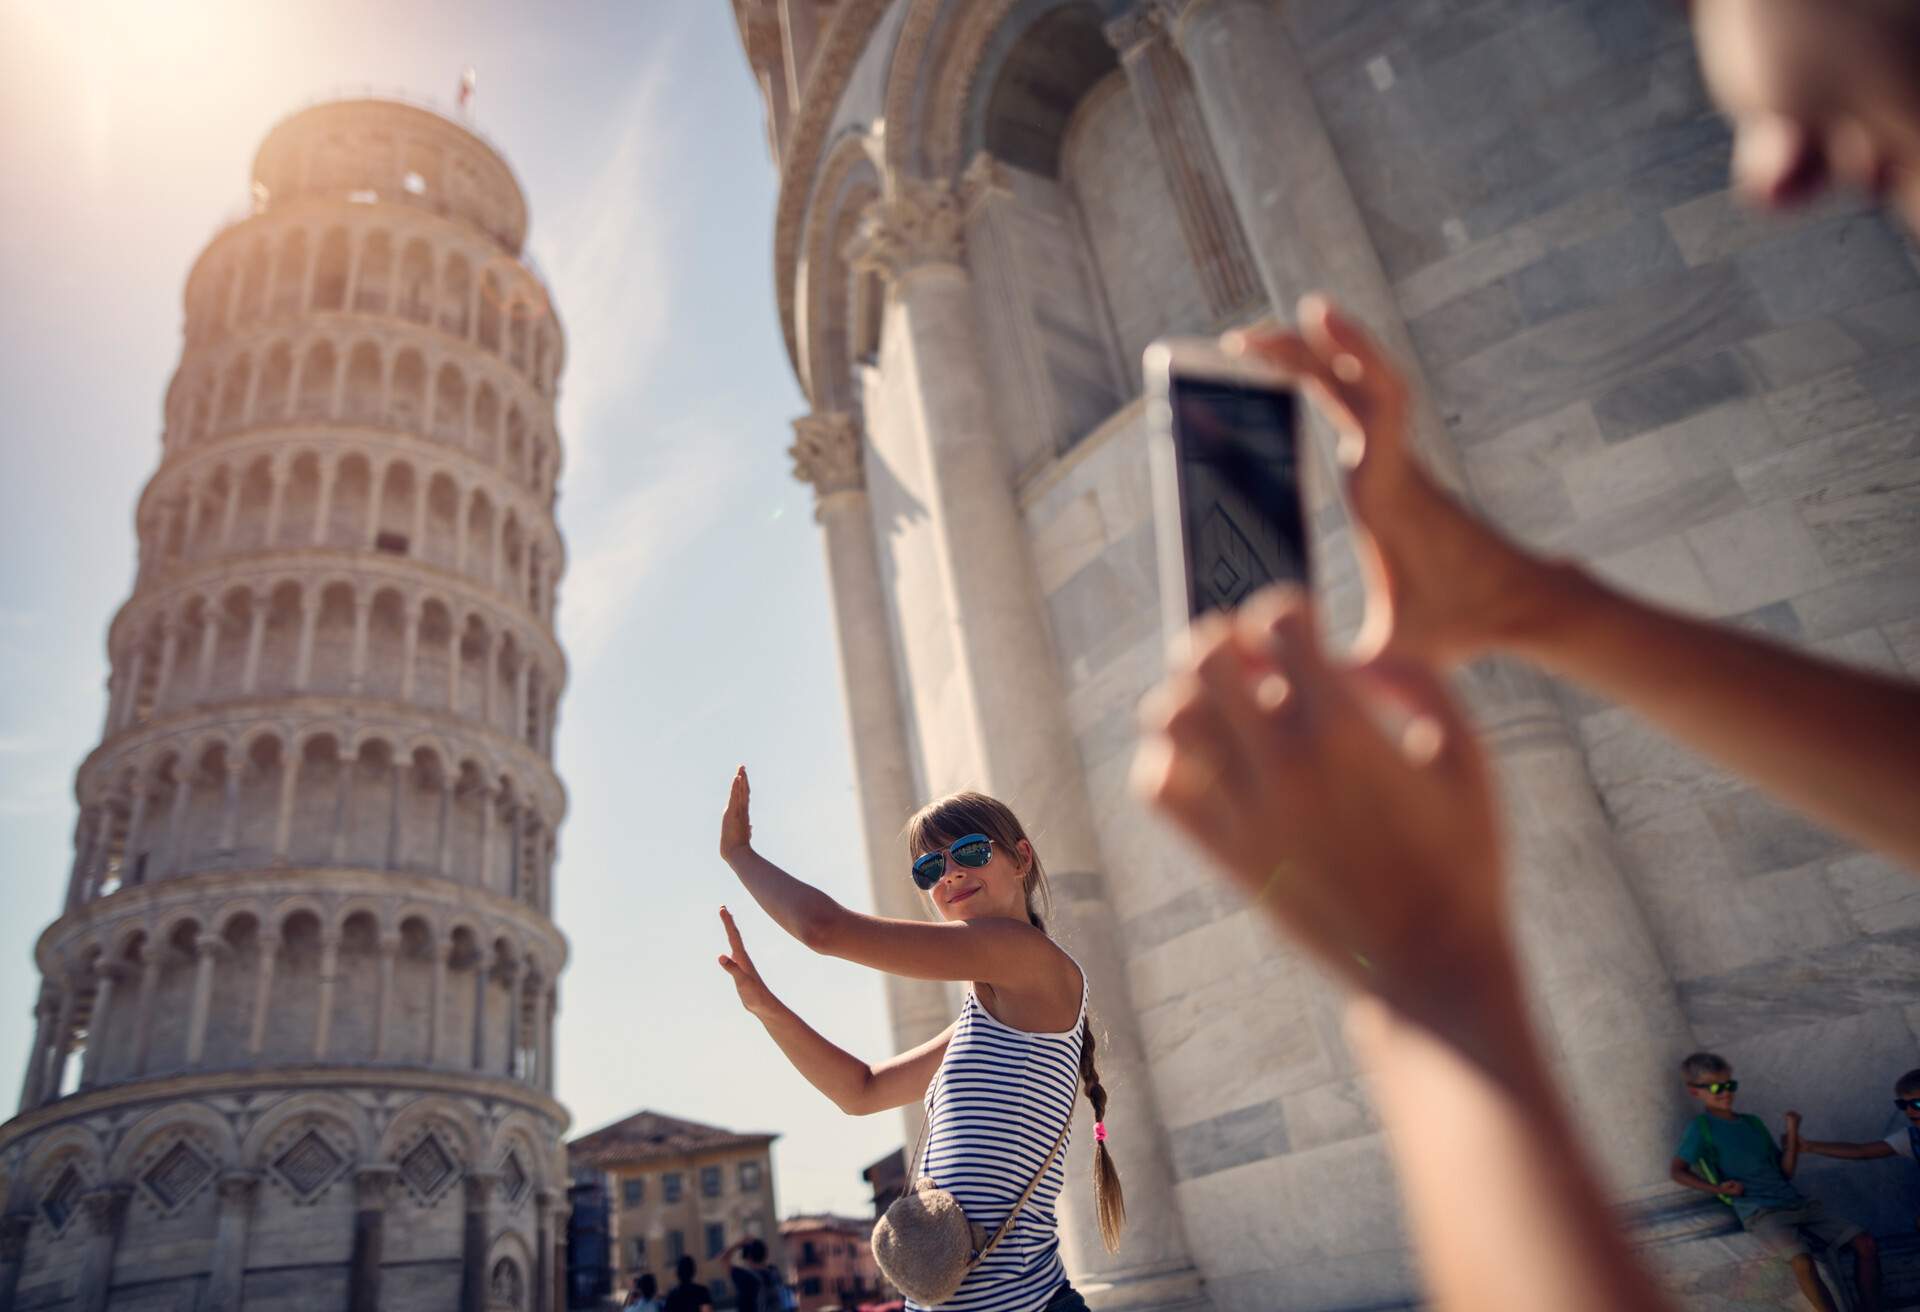 A phone in hand snapping pictures of a young woman posing with her arms raised near the Tower of Pisa.